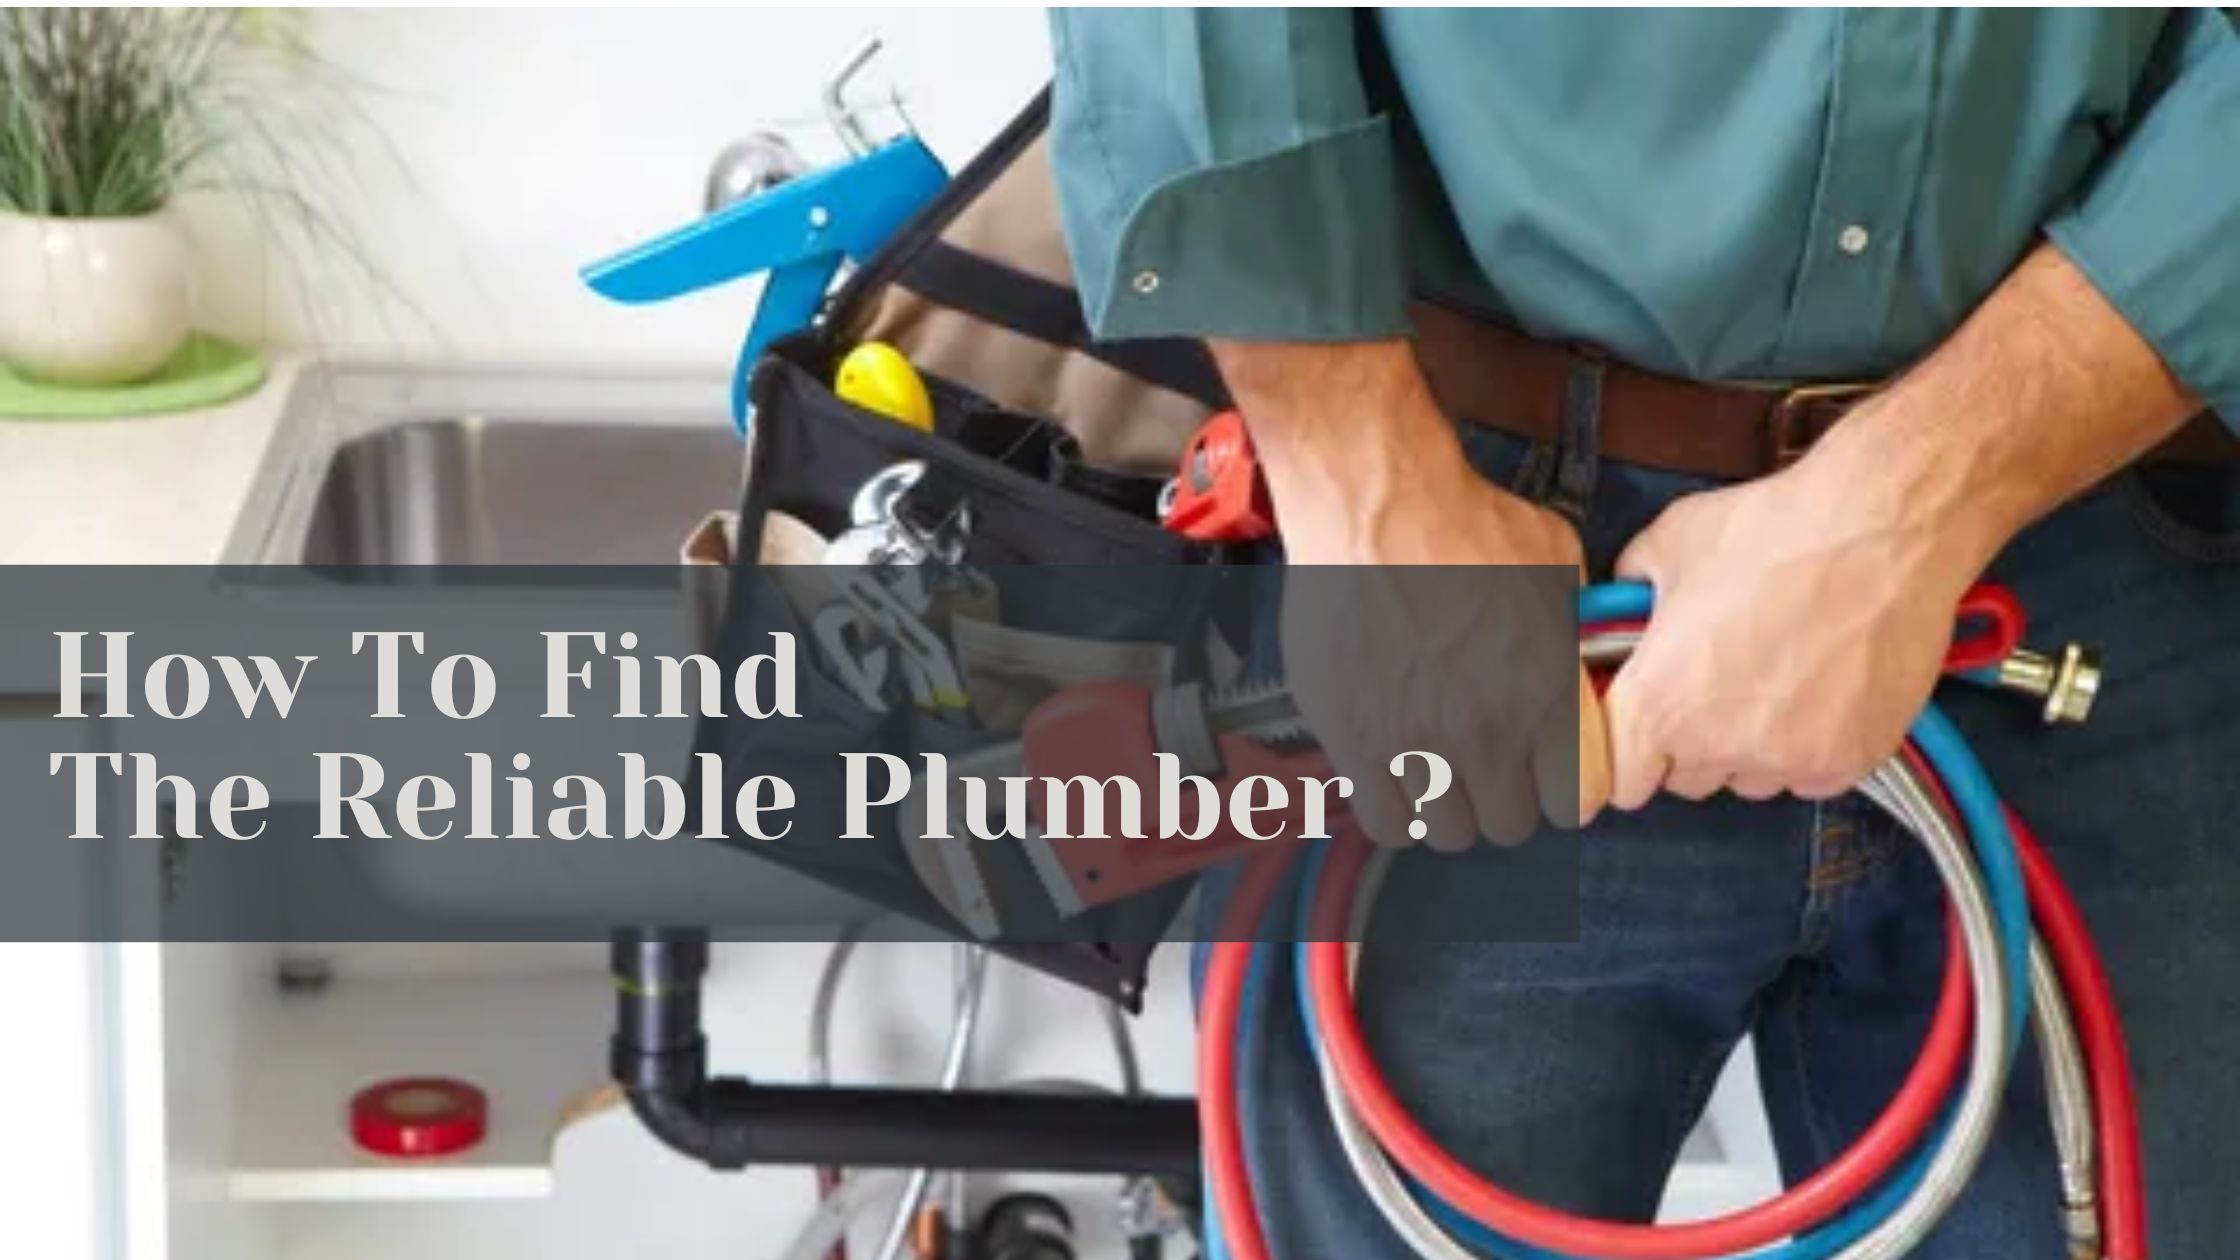 How To Find The Reliable Plumber